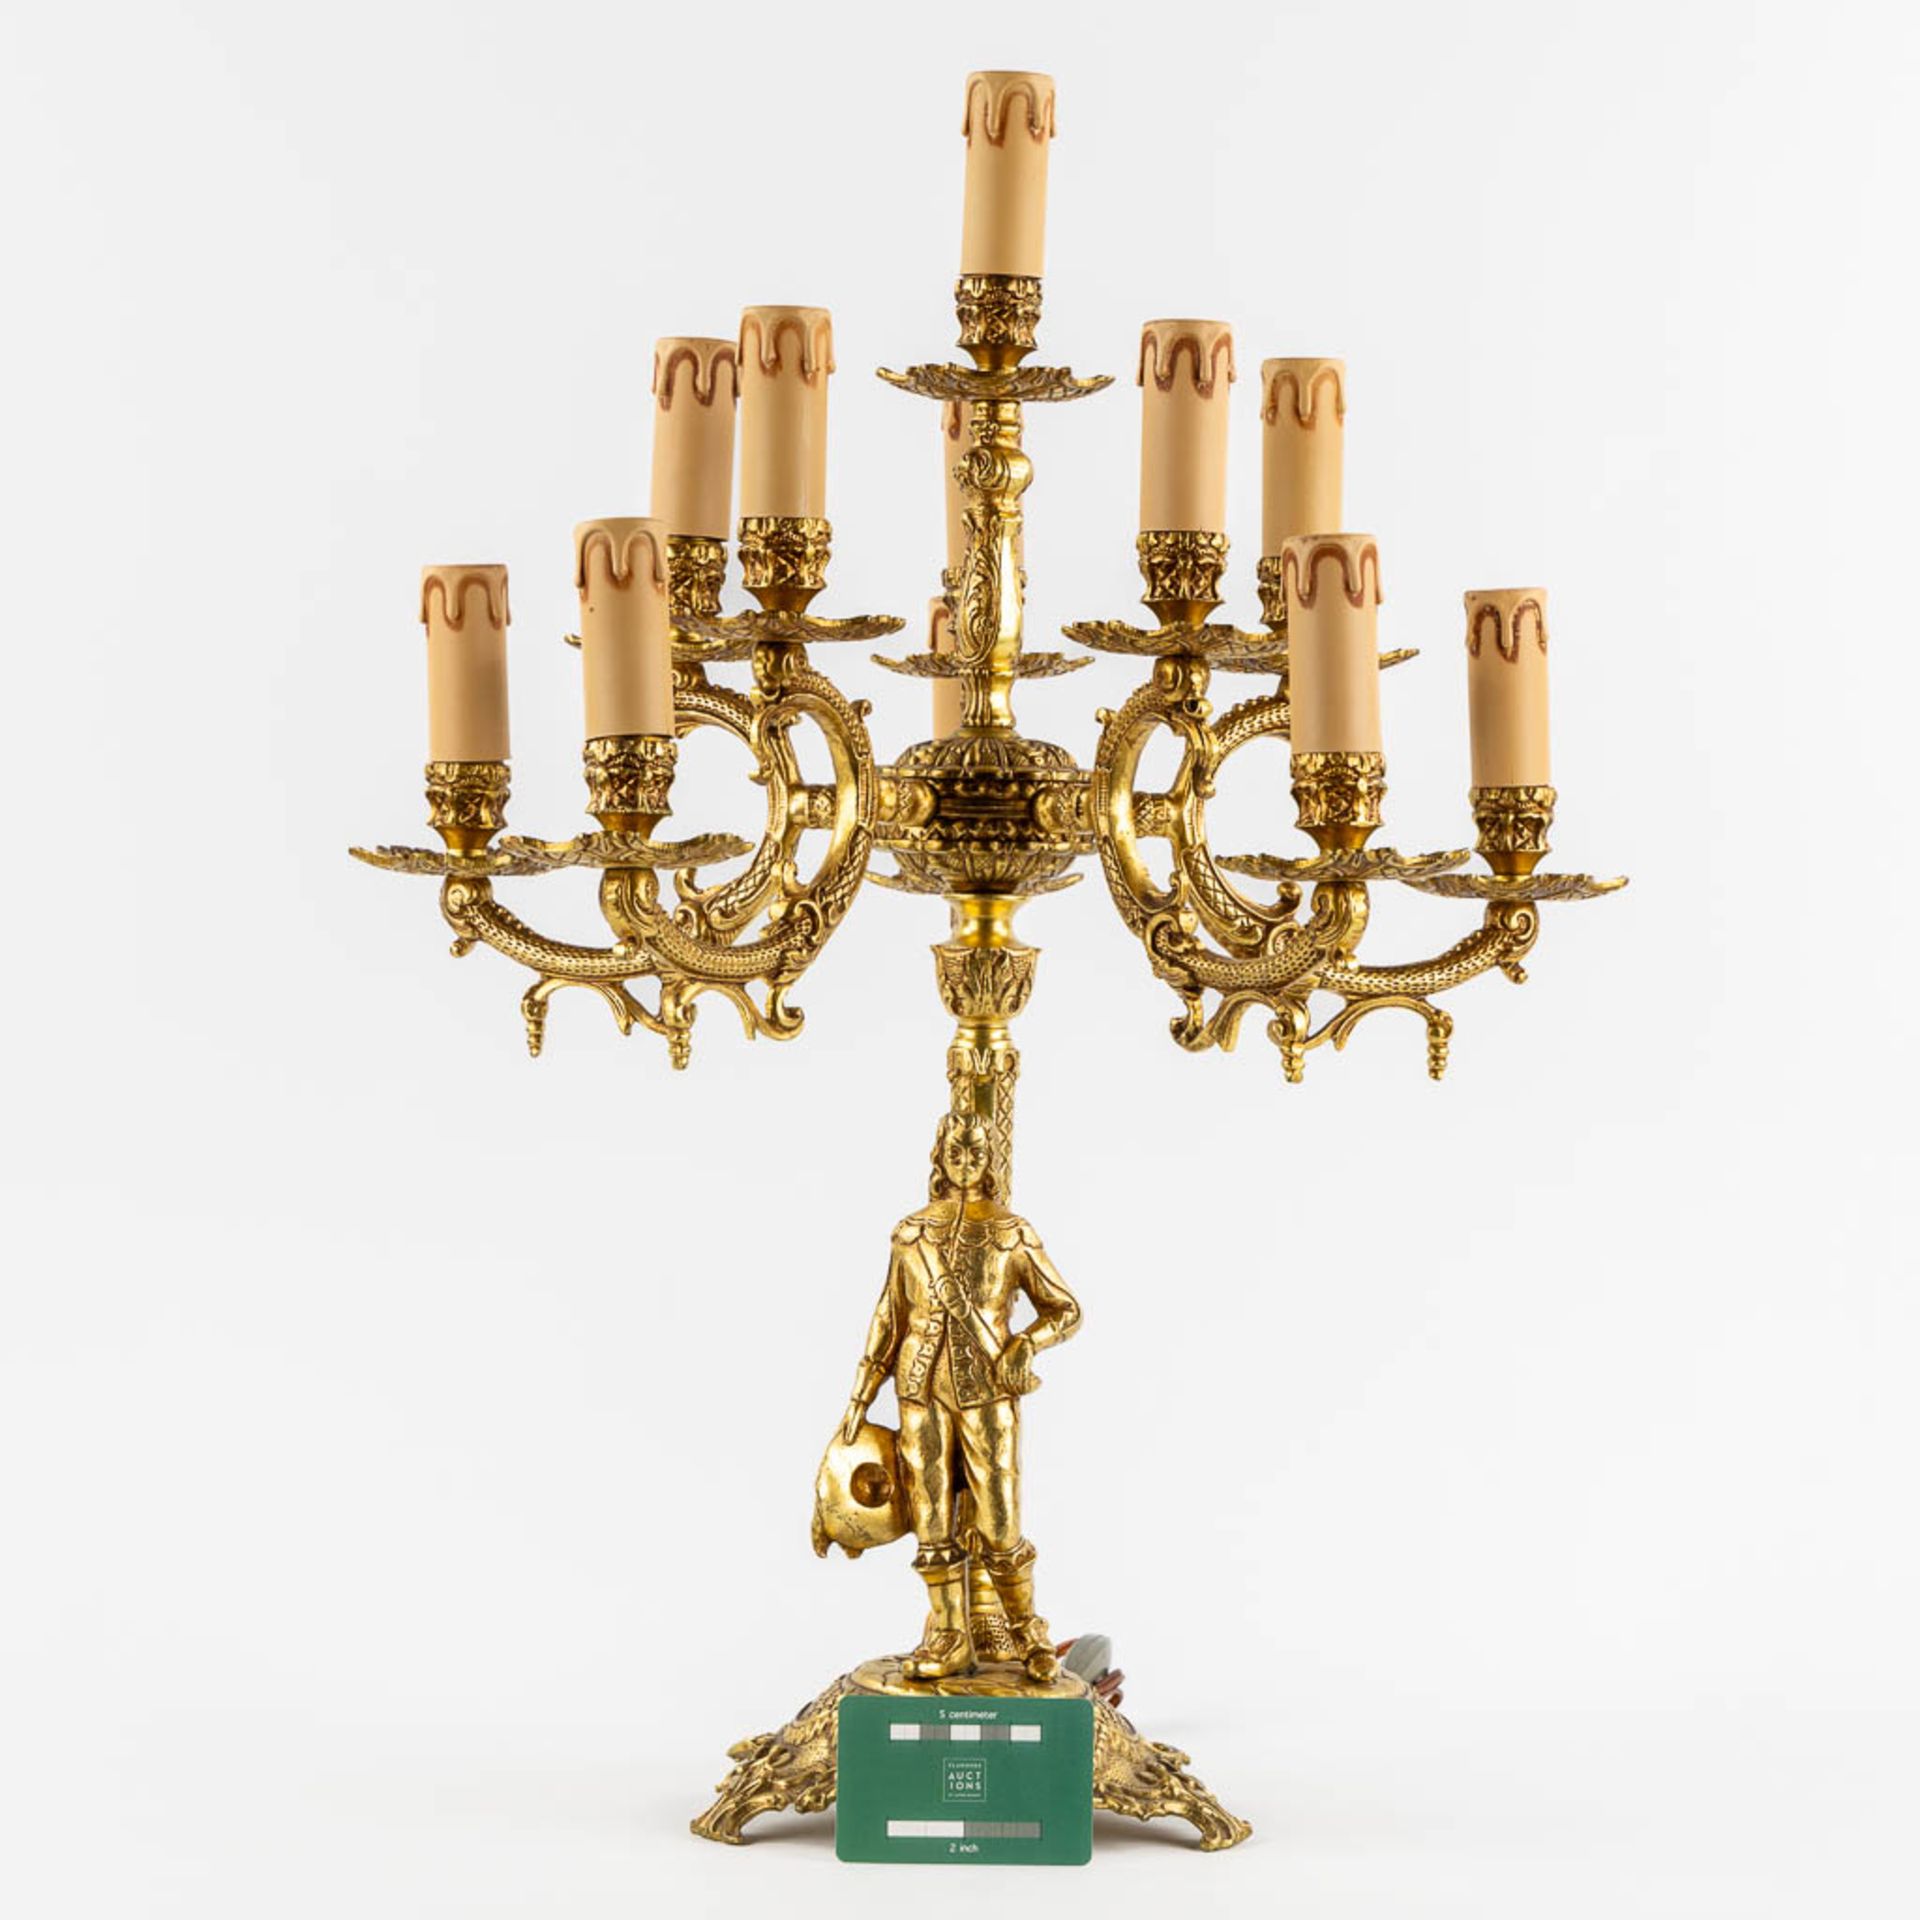 A large and decorative table lamp with a musketeer figurine, gilt bronze. 20th C. (H:61 x D:46 cm) - Image 2 of 11